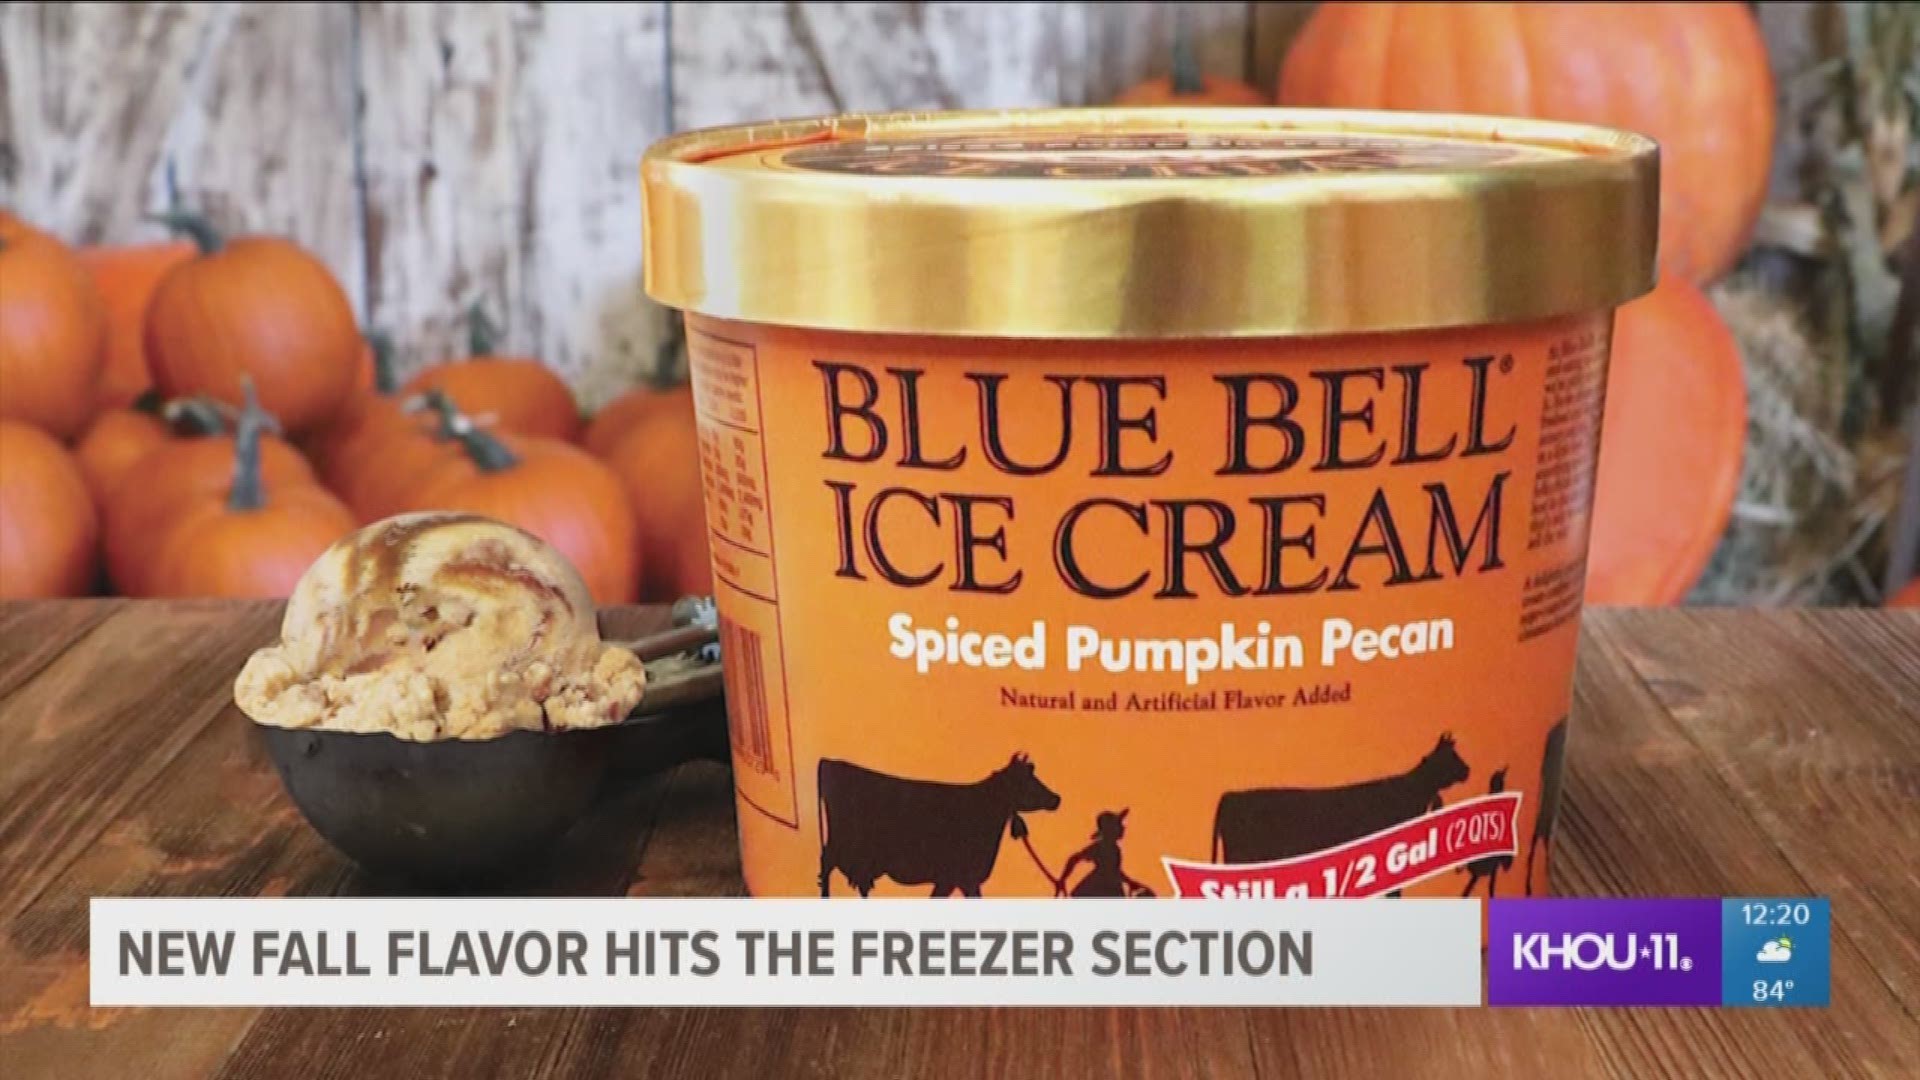 Blue Bell announced Monday its newest specialty flavor: Spiced Pumpkin Pecan.